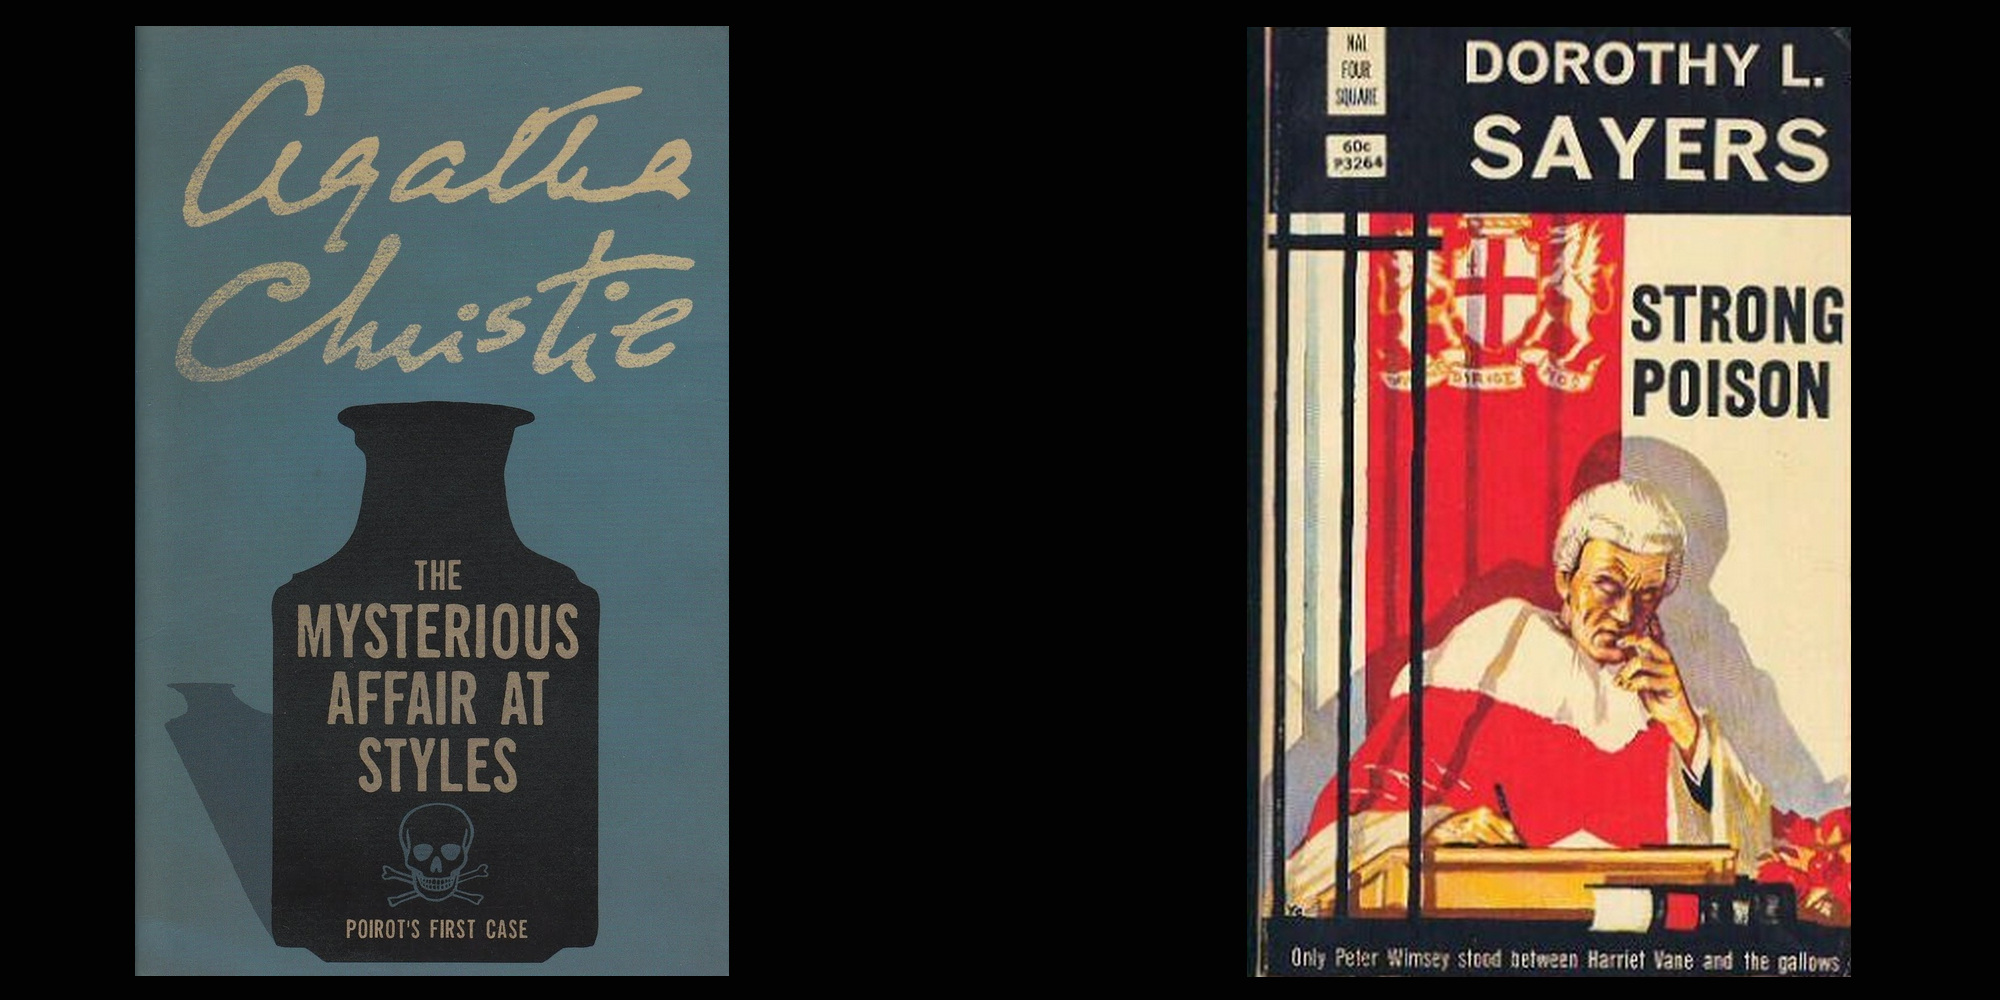 Agatha Christies - The Mysterious Affair at Styles & Dorothy L. Sayers Strong Poison book covers